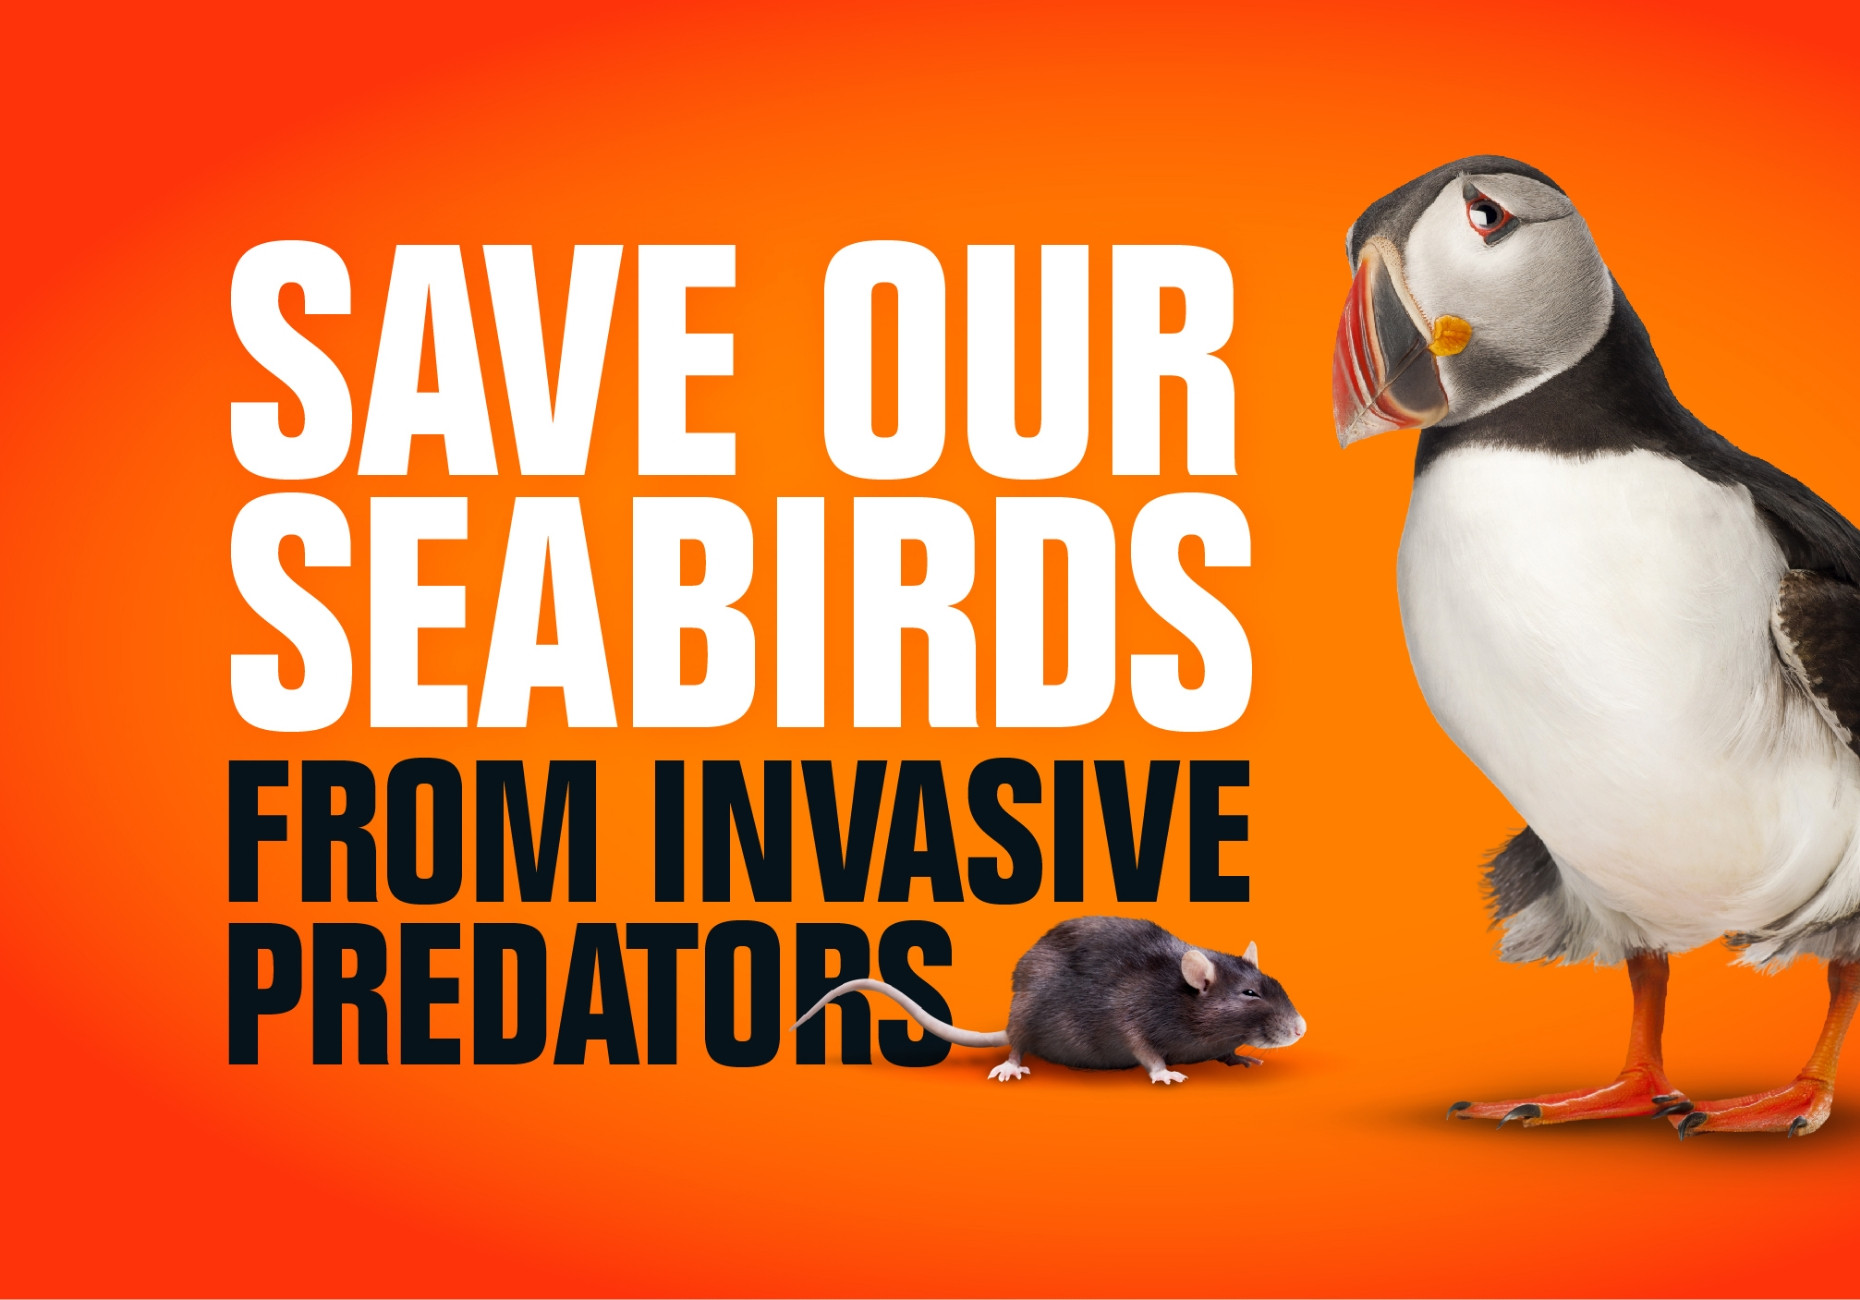 RSPB charity save our seabirds campaign marketing graphic design by Root Studio